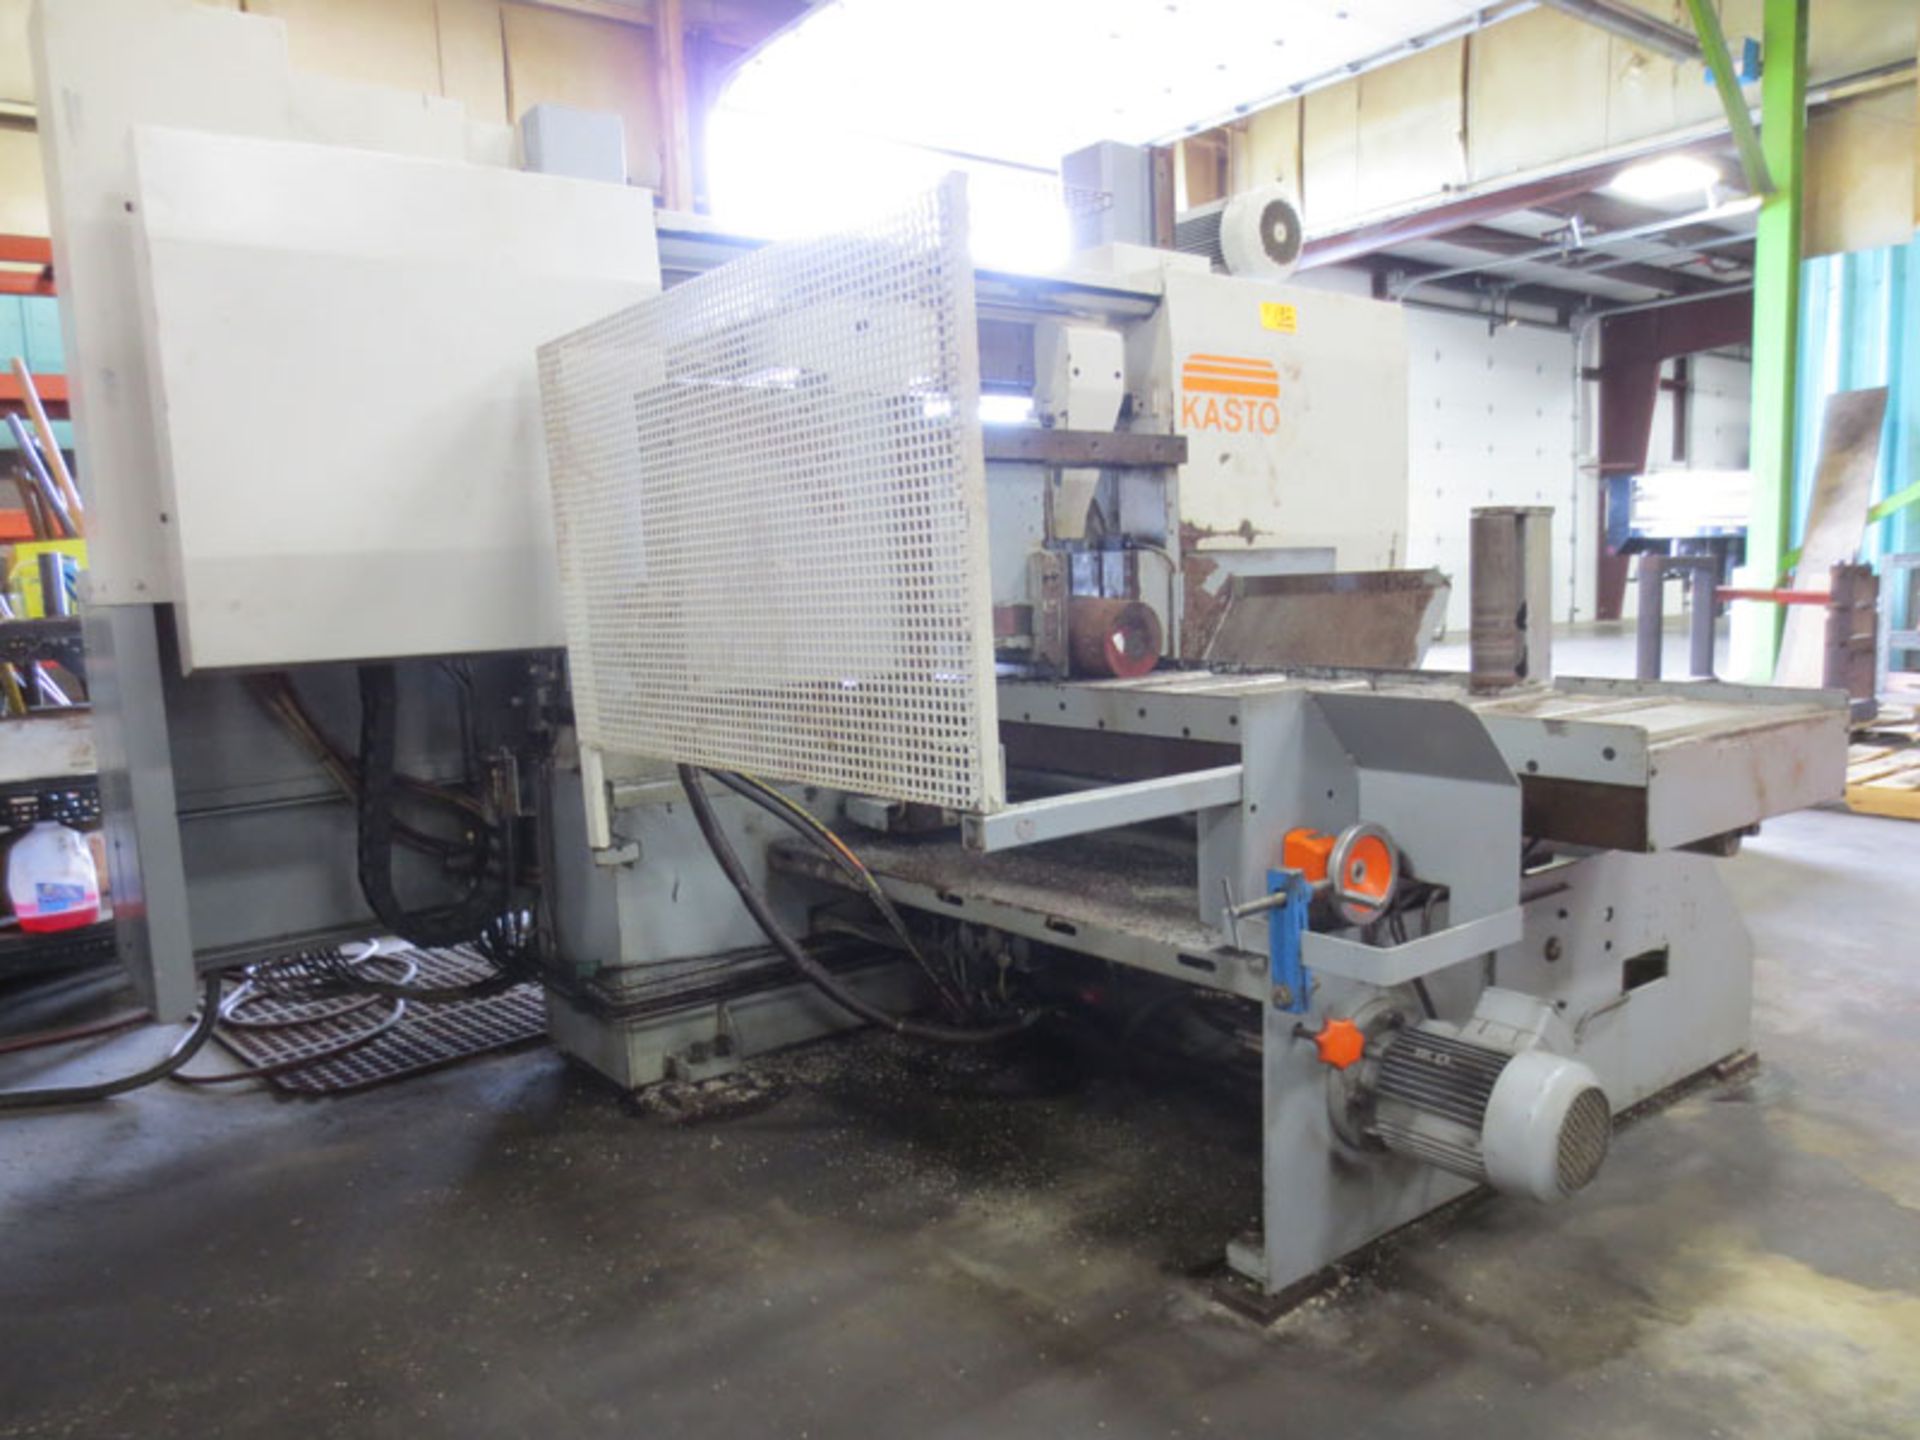 Kasto HBA 420AU Automatic Horizontal Bandsaw with approx. 22.5x62” raised roller outfeed and - Image 7 of 7